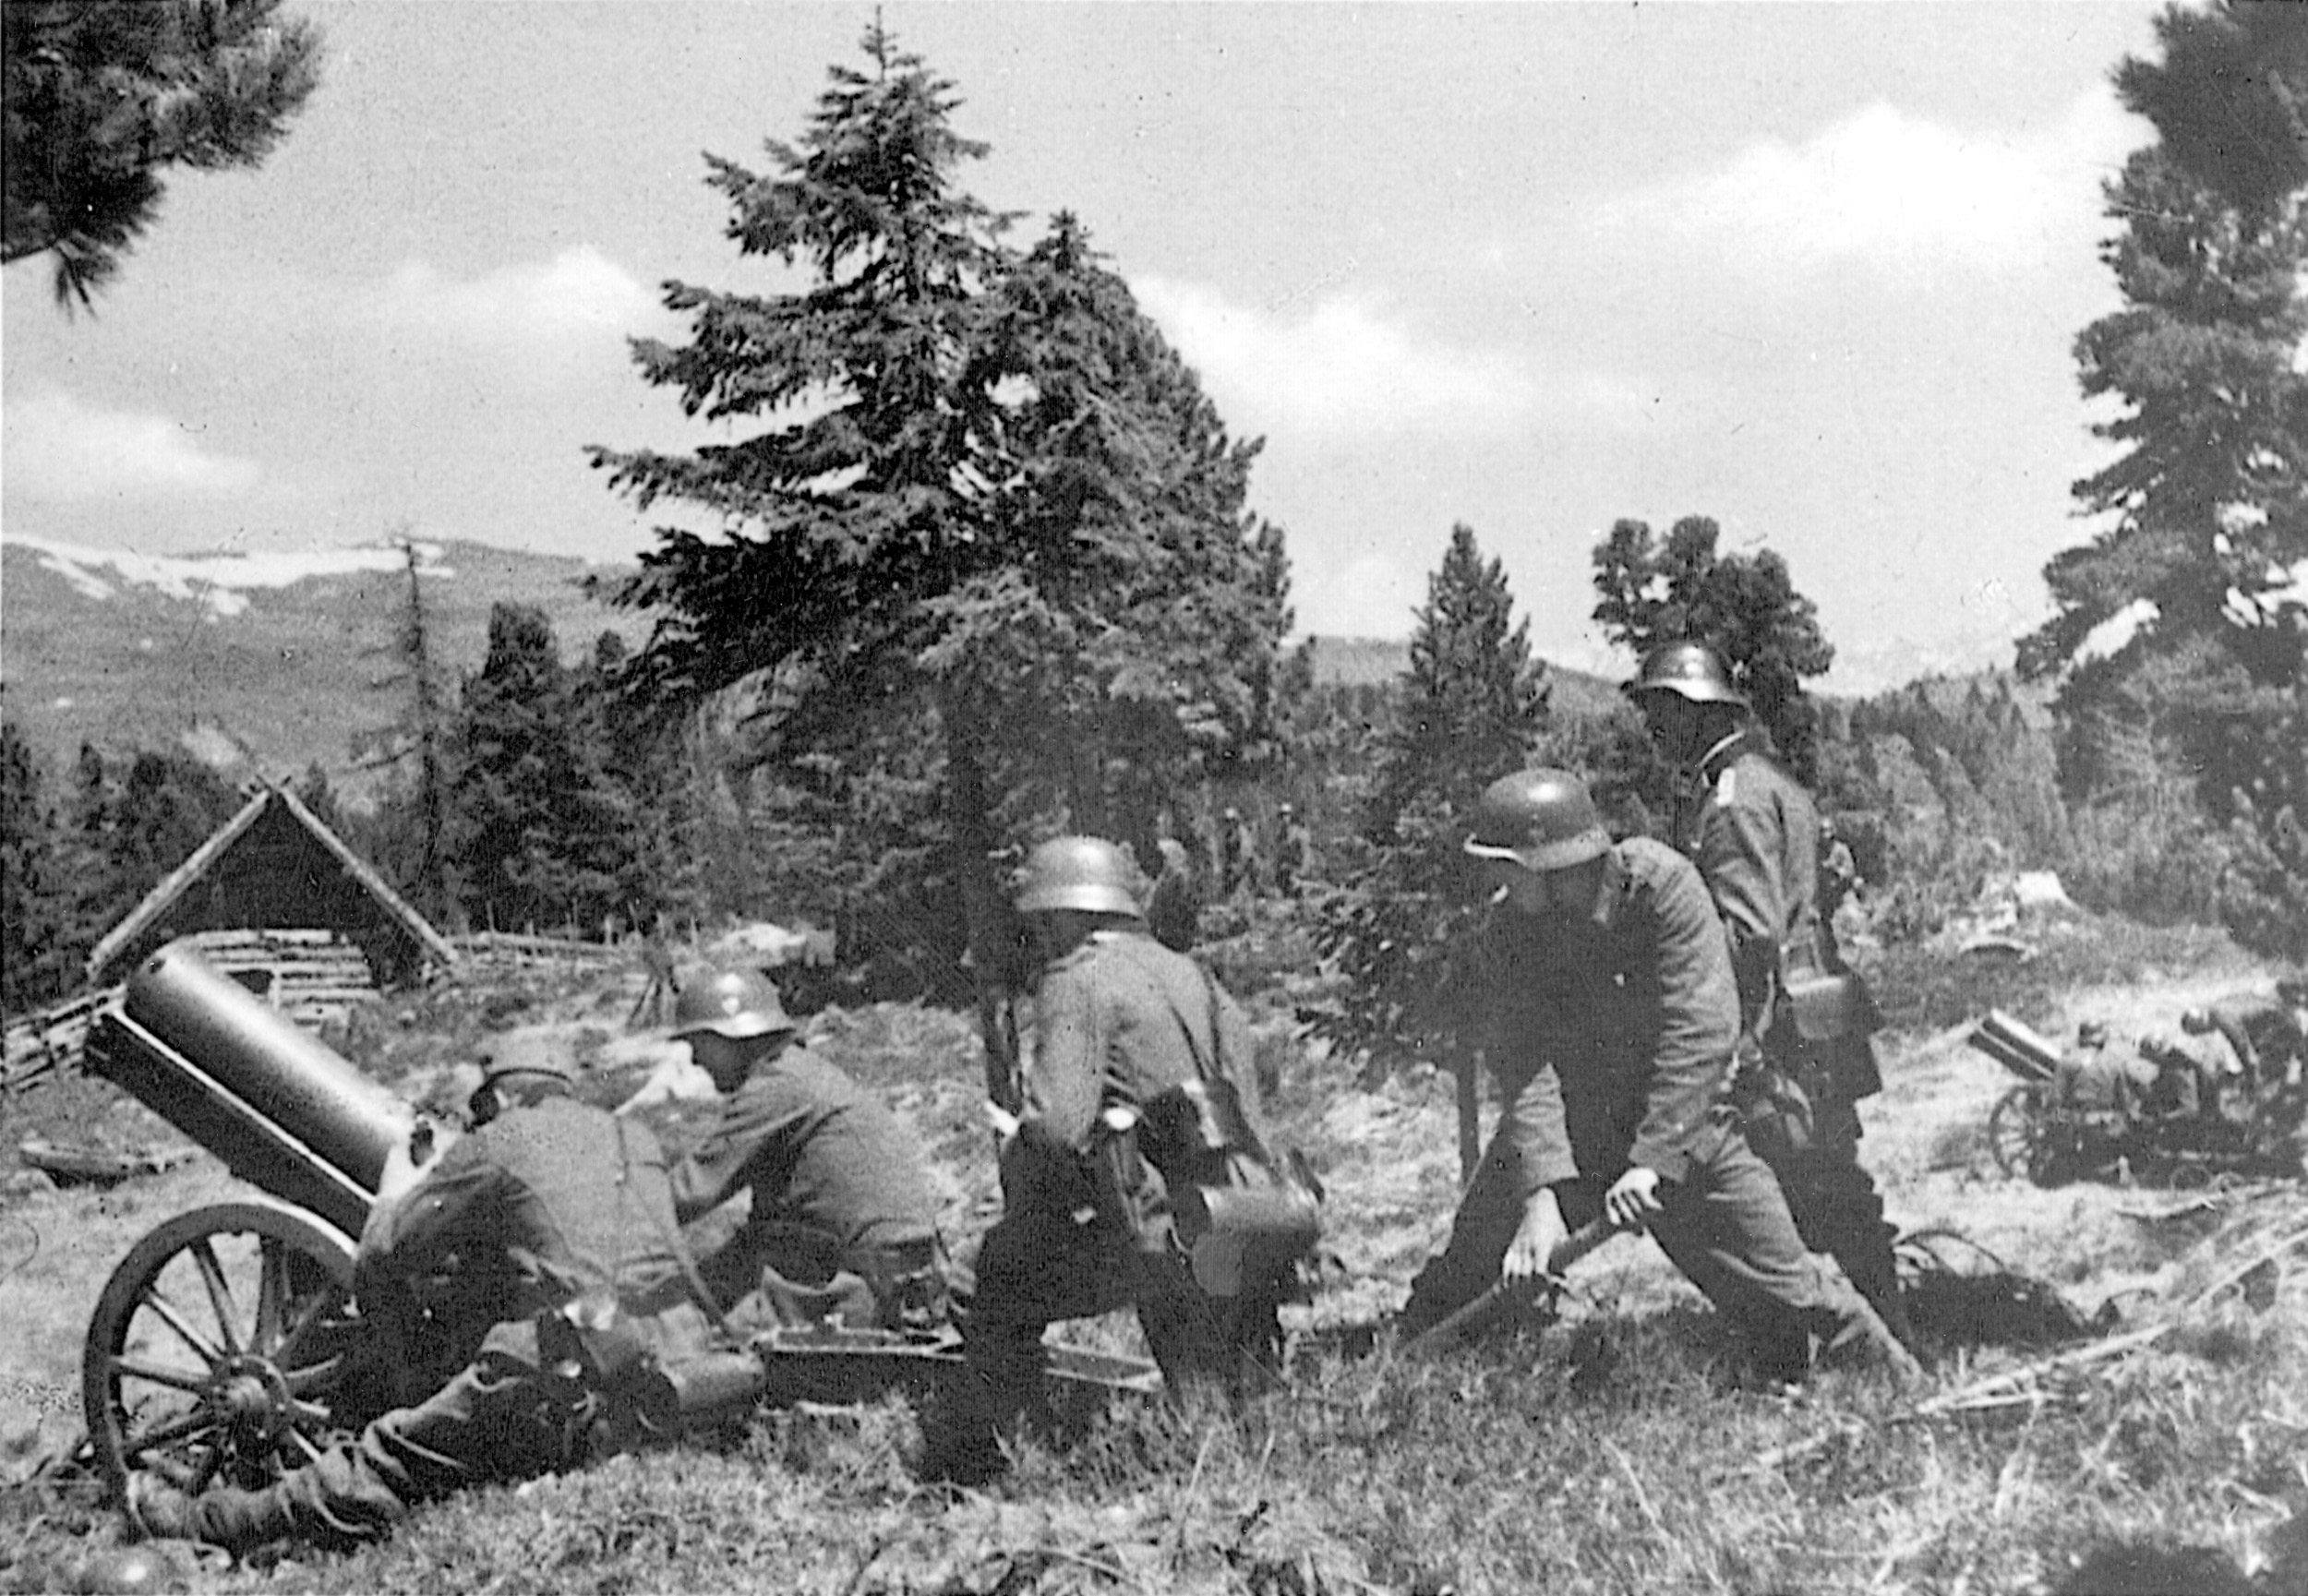 During warmer days, German mountain troops prepare to engage the enemy with a portable howitzer. Usually, the lightly armed mountain troops depended on artillery of this type, mostly 75mm, for firepower in difficult terrain.